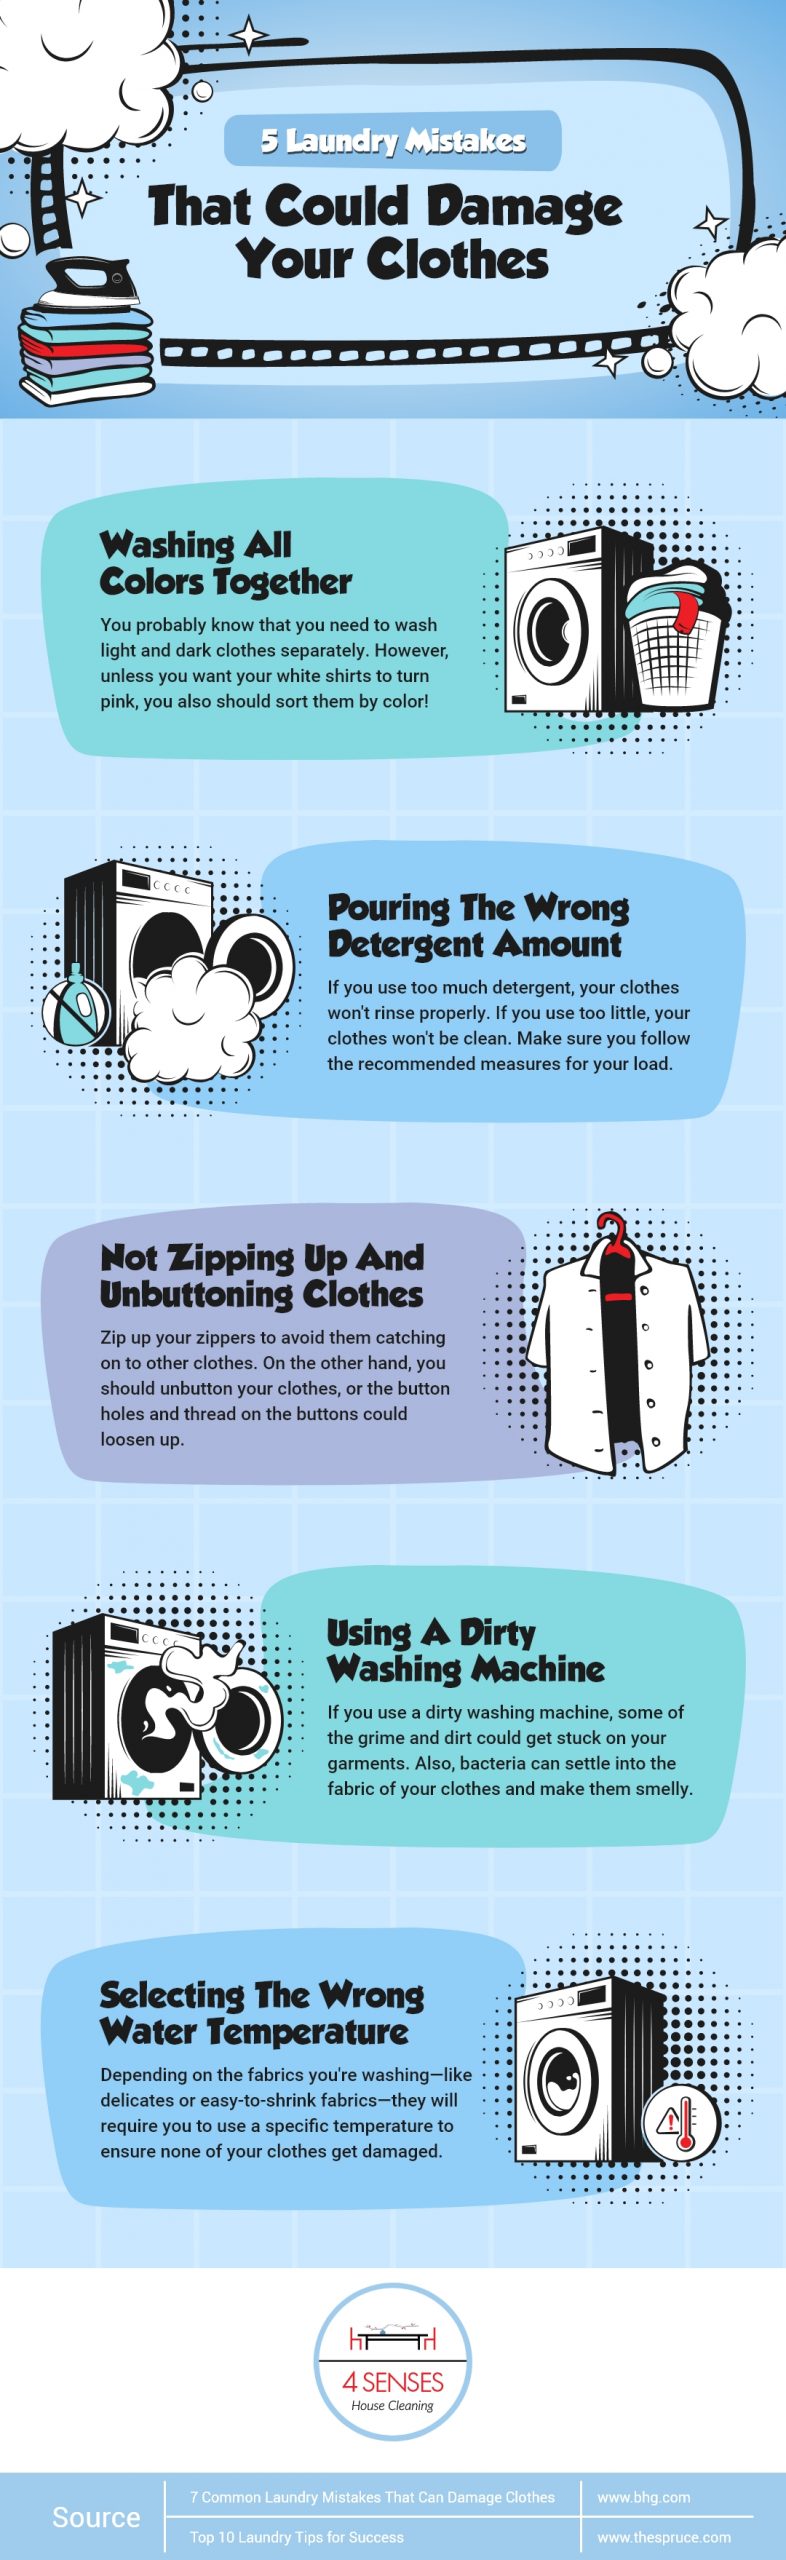 Dos and Don'ts of Washing Clothes With Zippers